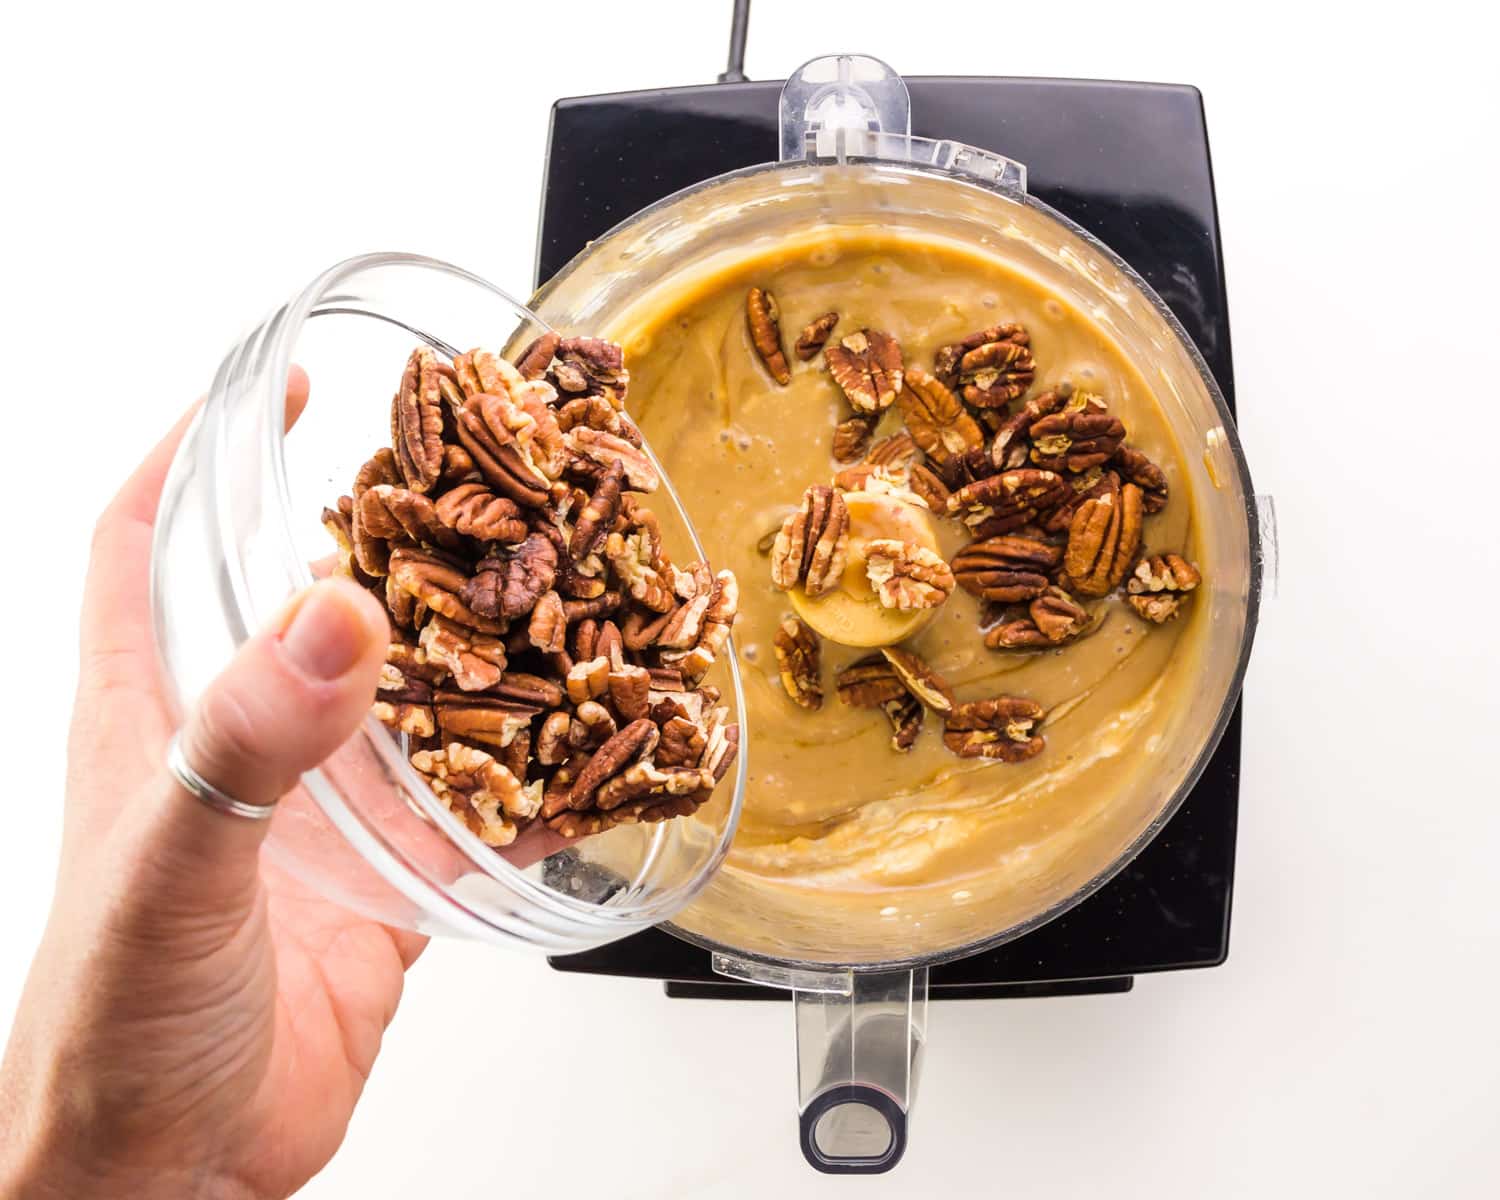 A hand holds a bowl of pecans, adding them to a food processor with a caramel-colored sauce.